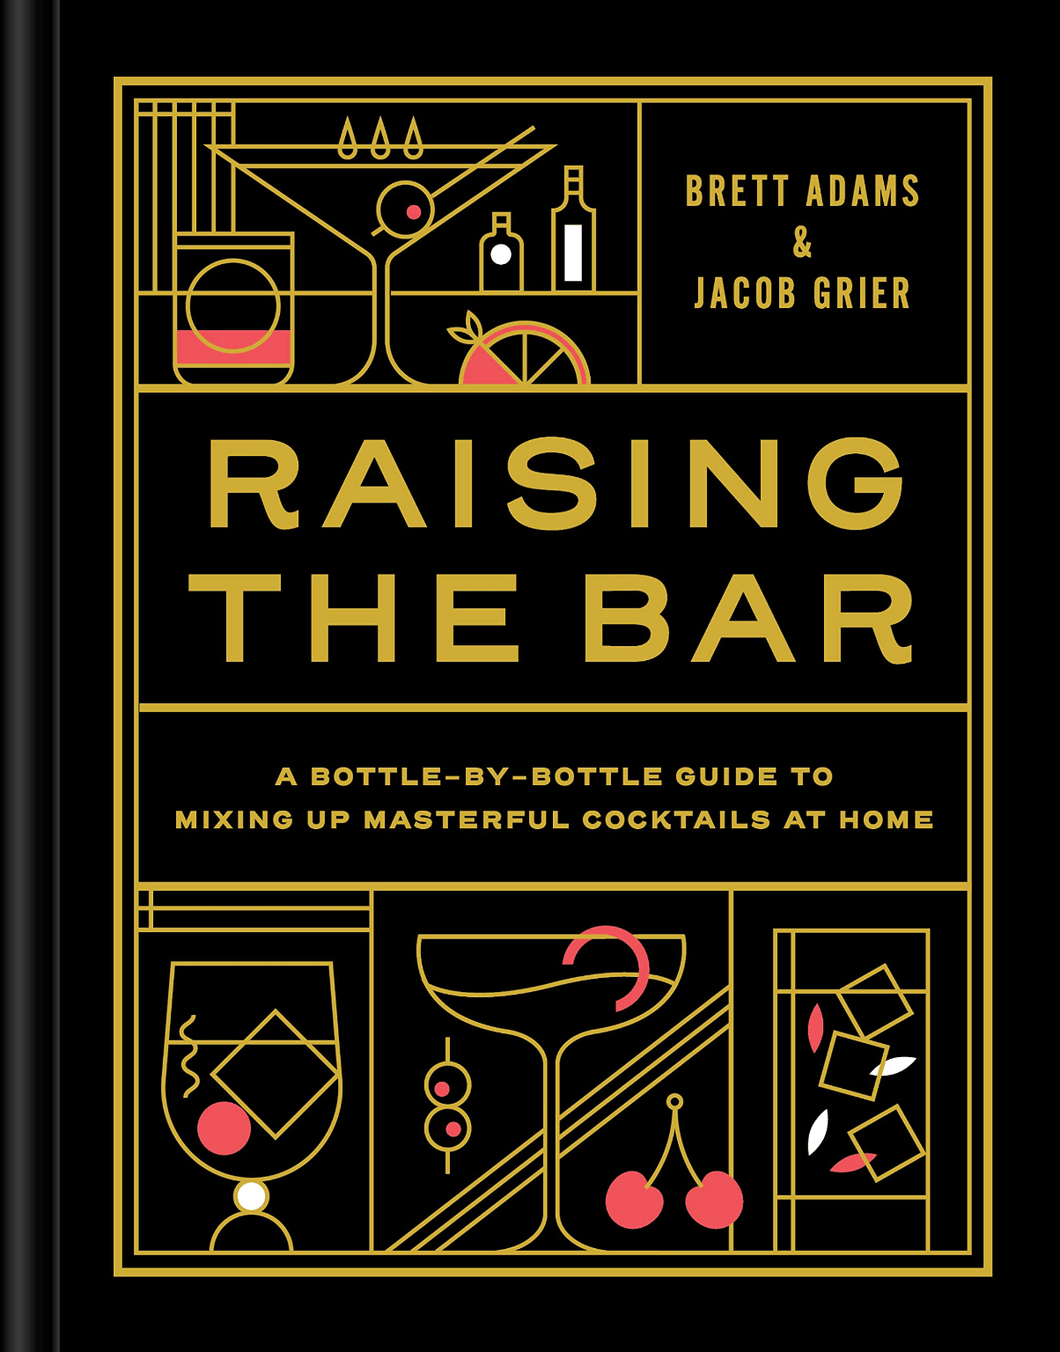 Raising the Bar: A Bottle-by-Bottle Guide to Mixing Masterful Cocktails at Home